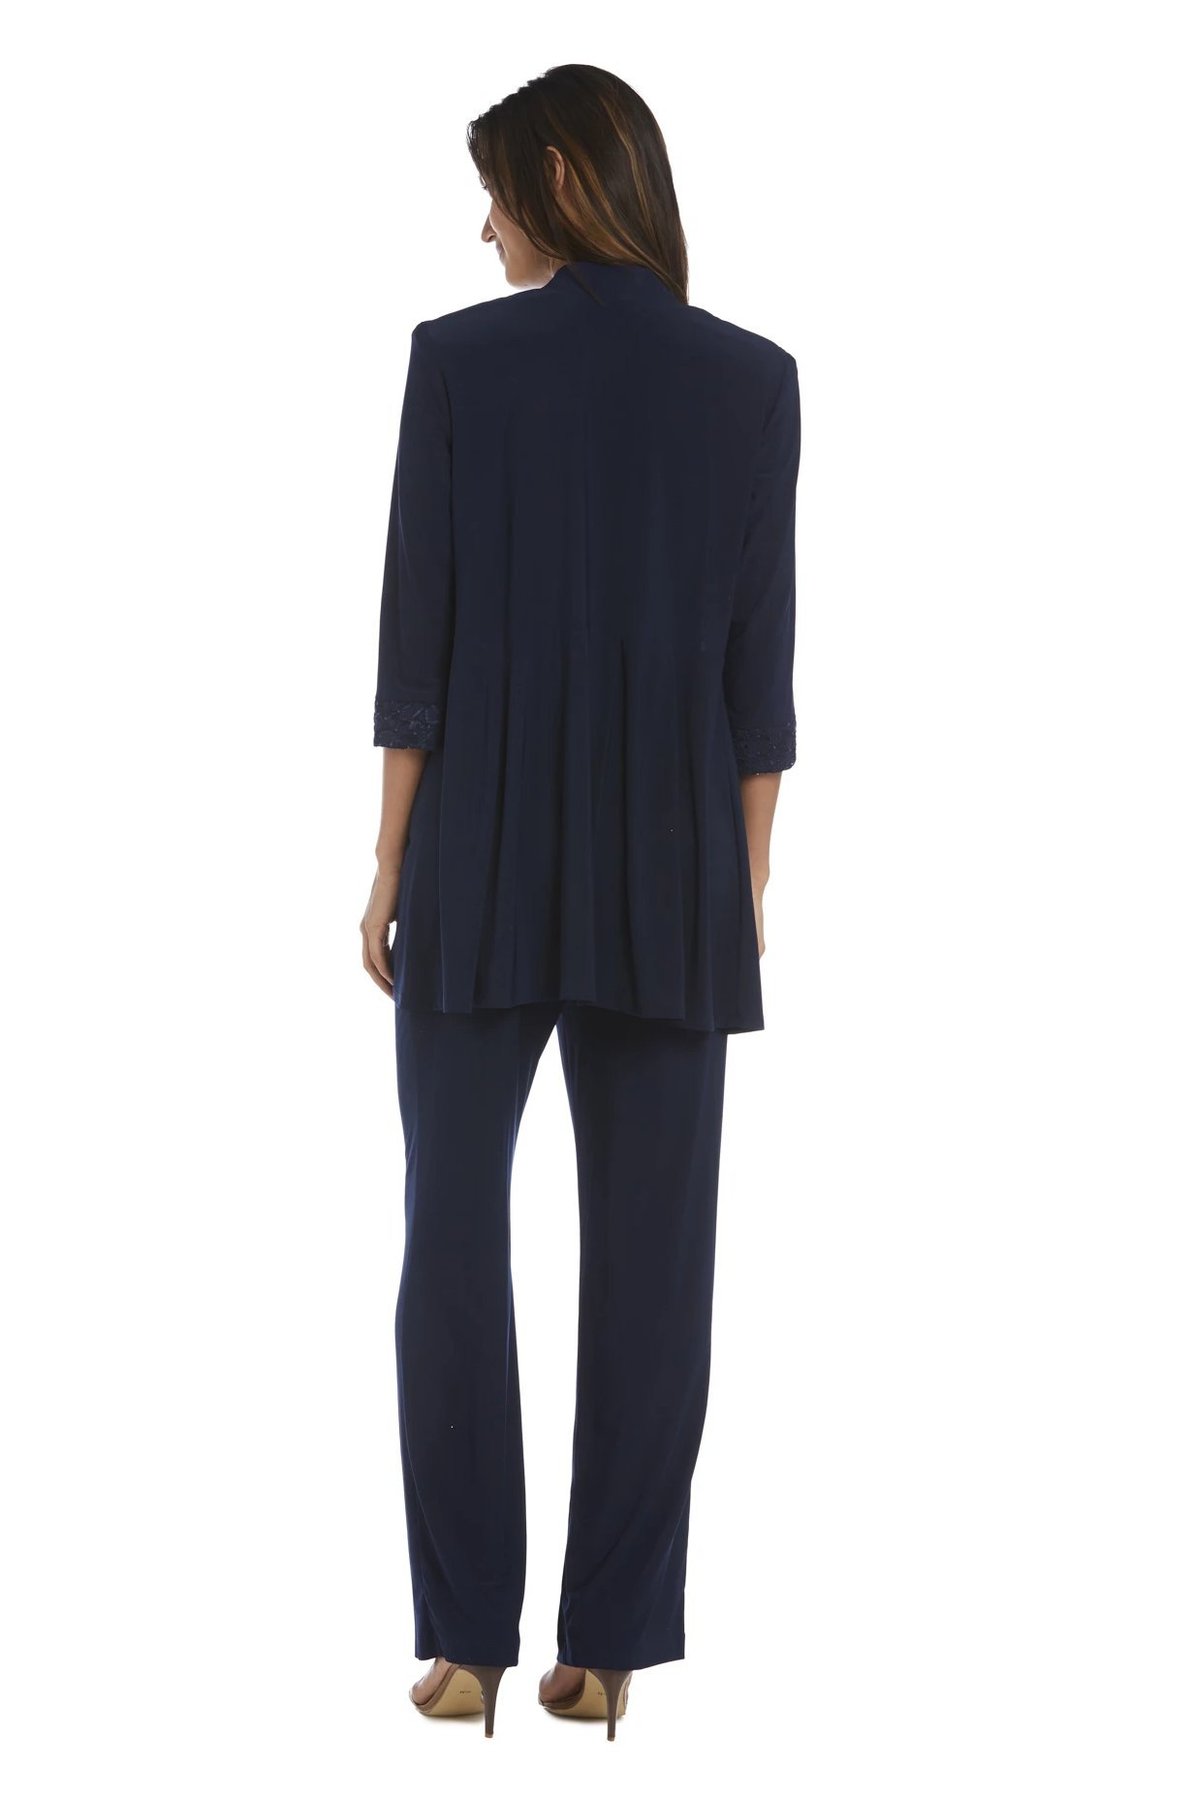 R&M Richards Women's Lace ITY 2 Piece Pant Suit - Mother of the bride outfit, 6 Navy - image 2 of 2